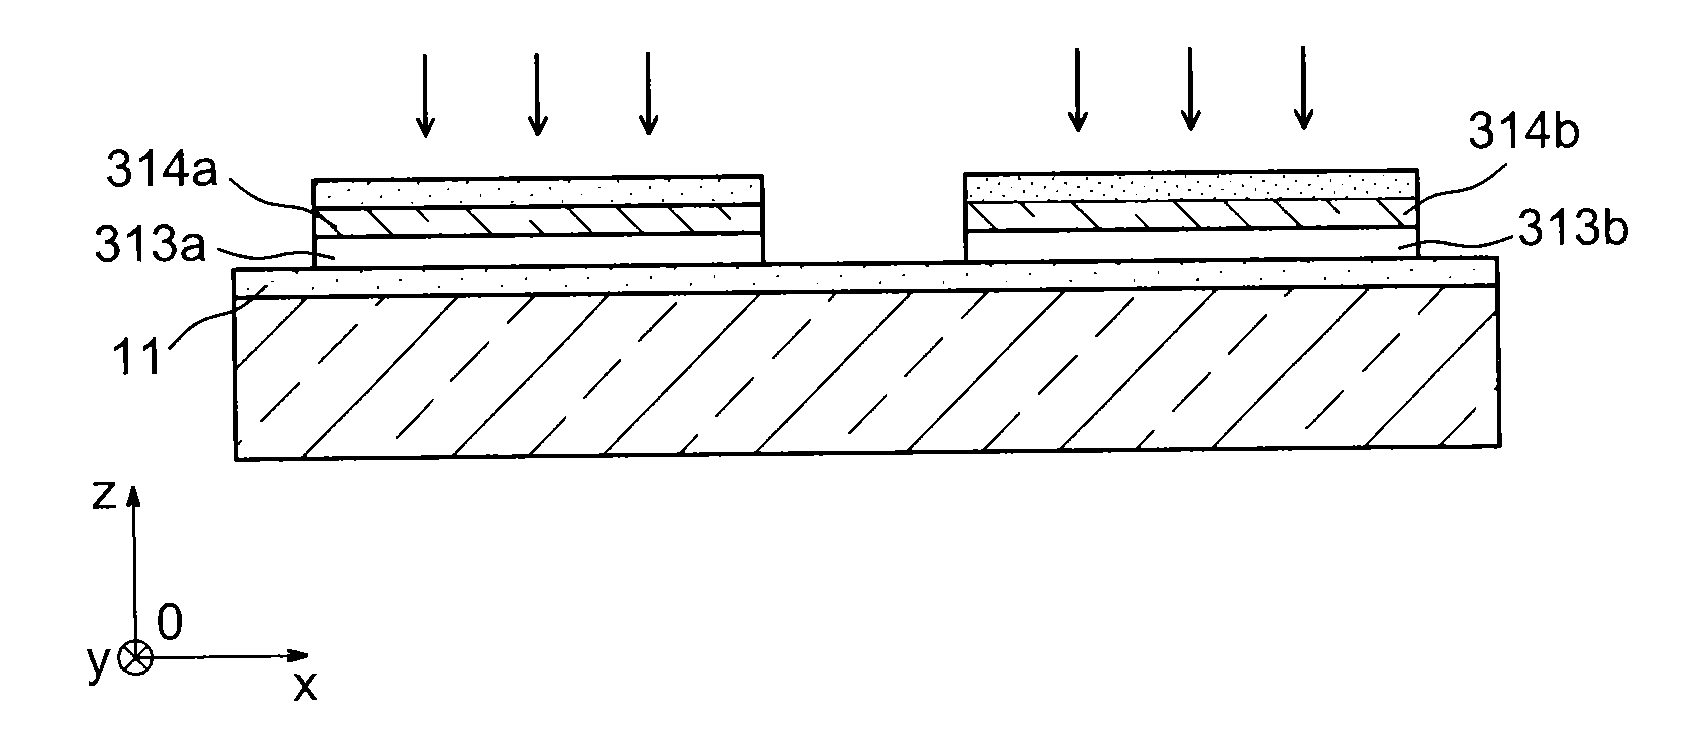 Method for producing strained semi-conductor blocks on the insulating layer of a semi-conductor on insulator substrate